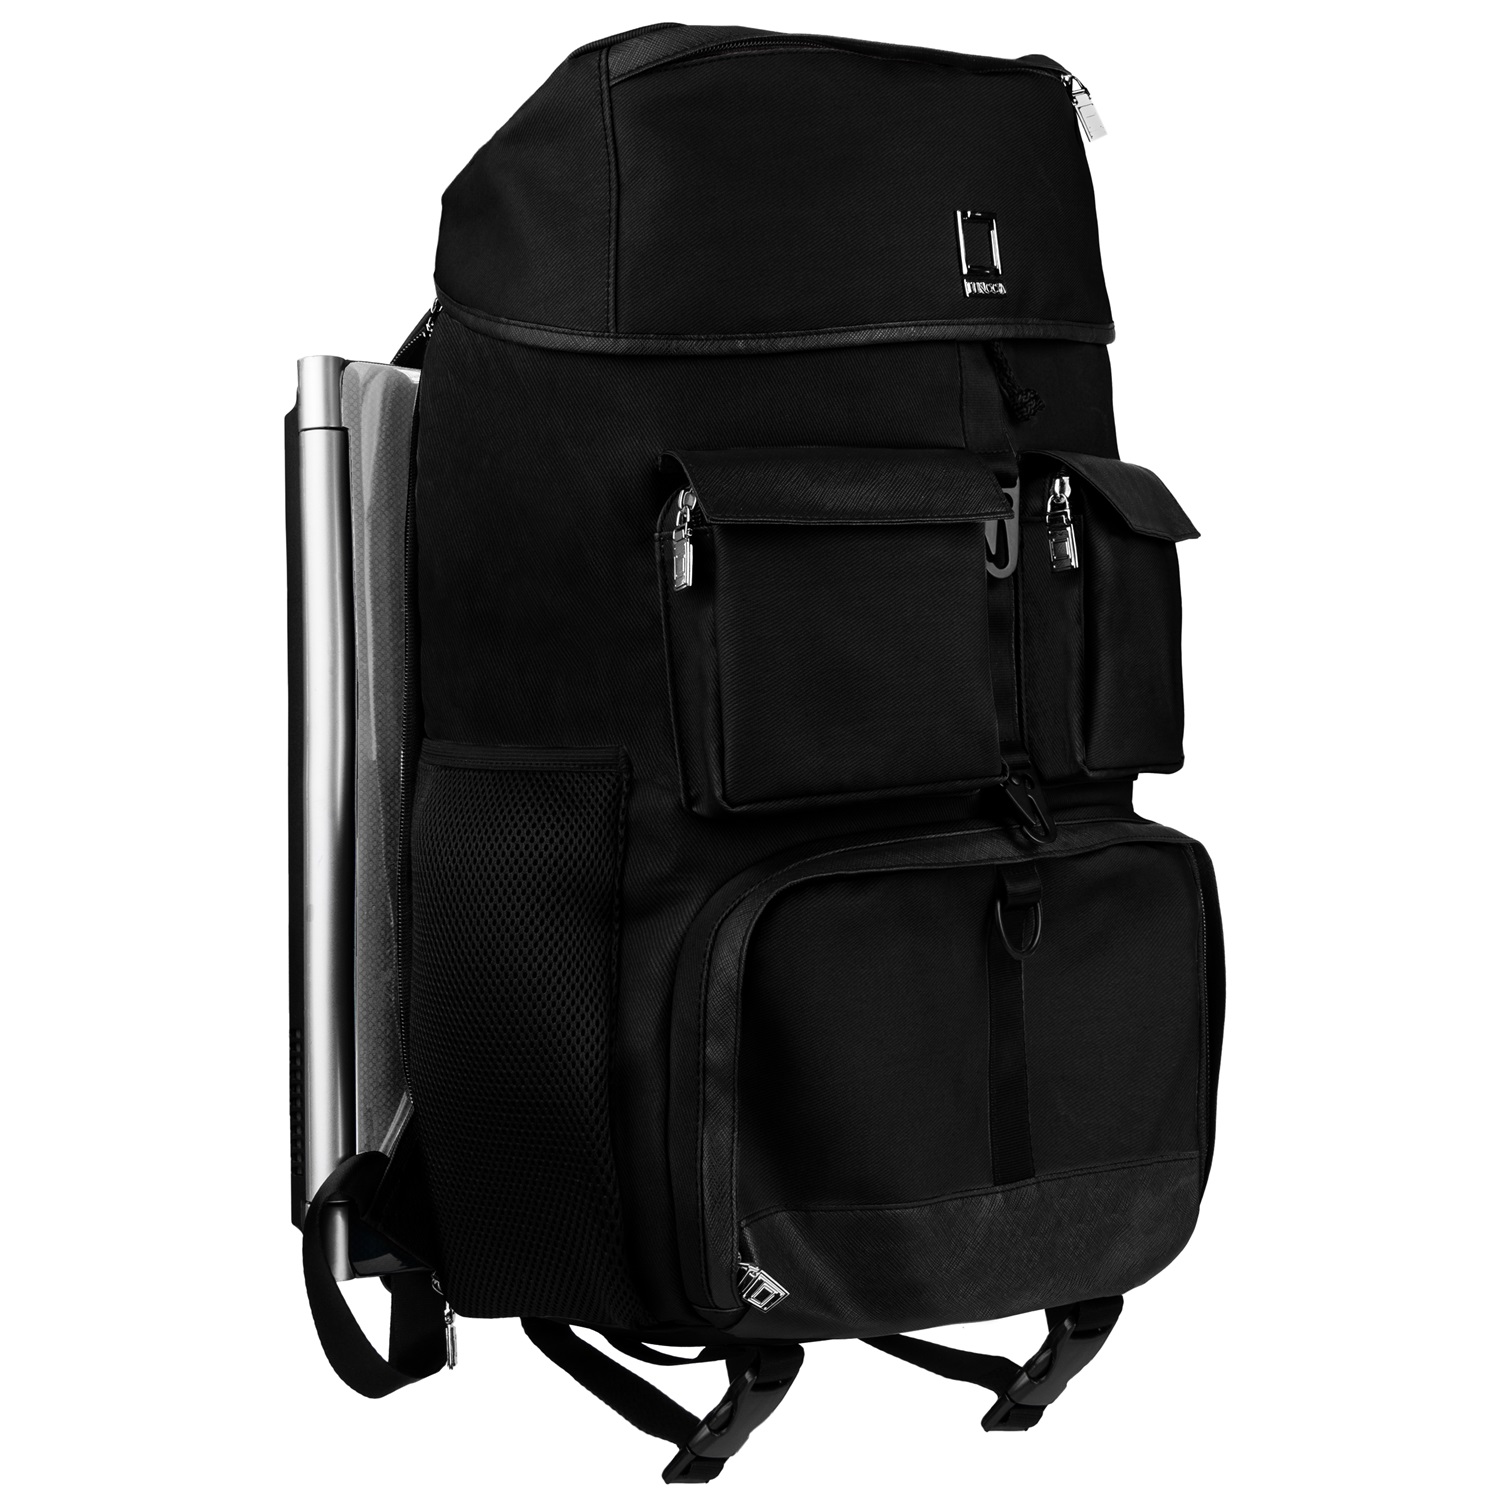 Lencca Logan Unisex Professional Twill Travel Backpack for both Laptop and Camera Devices fits Apple Macbook Air / Pro (All Sizes)